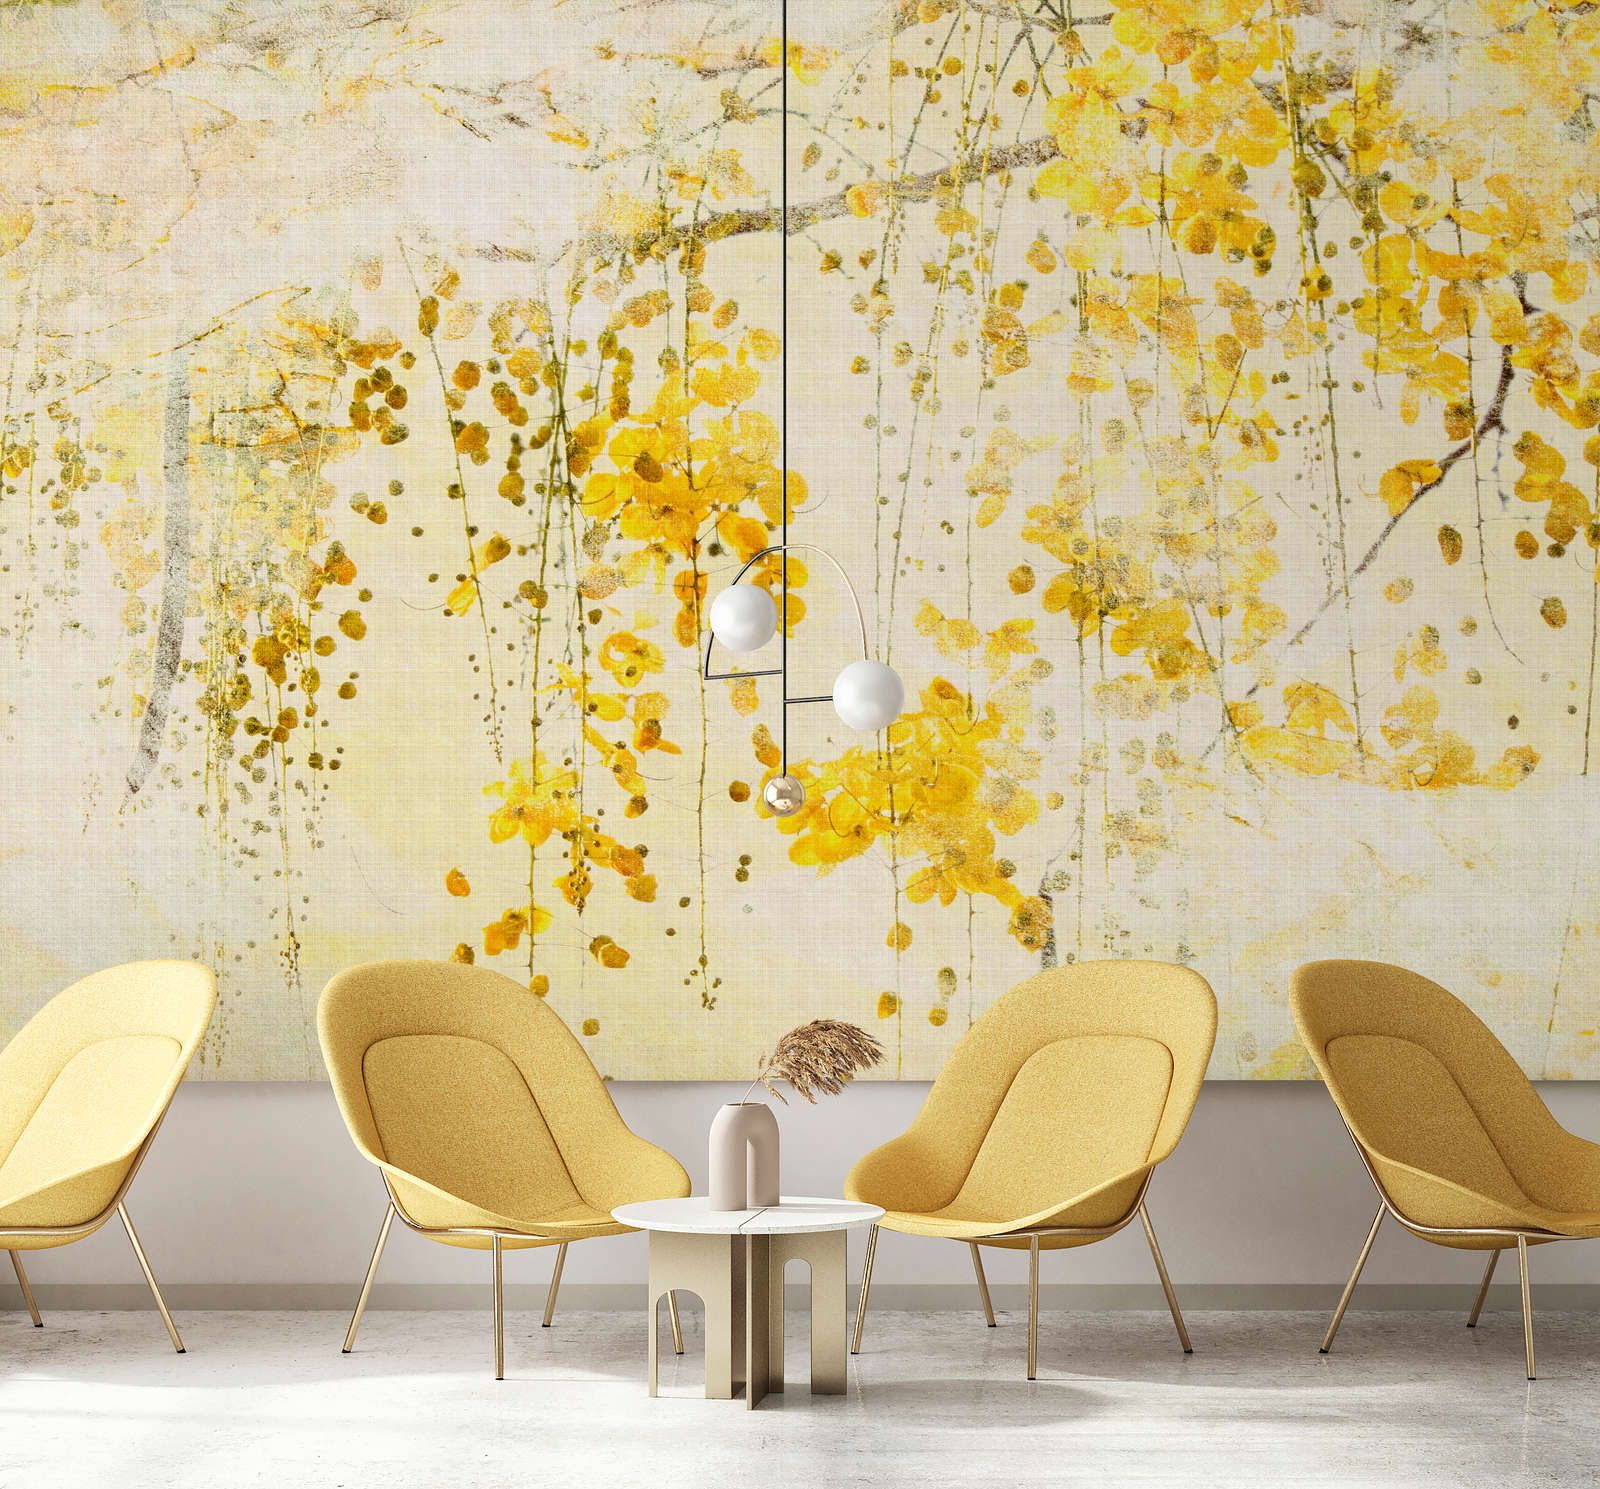             Photo wallpaper »taiyo« - Flower garland with linen structure in the background - Yellow | Smooth, slightly pearly shimmering non-woven fabric
        